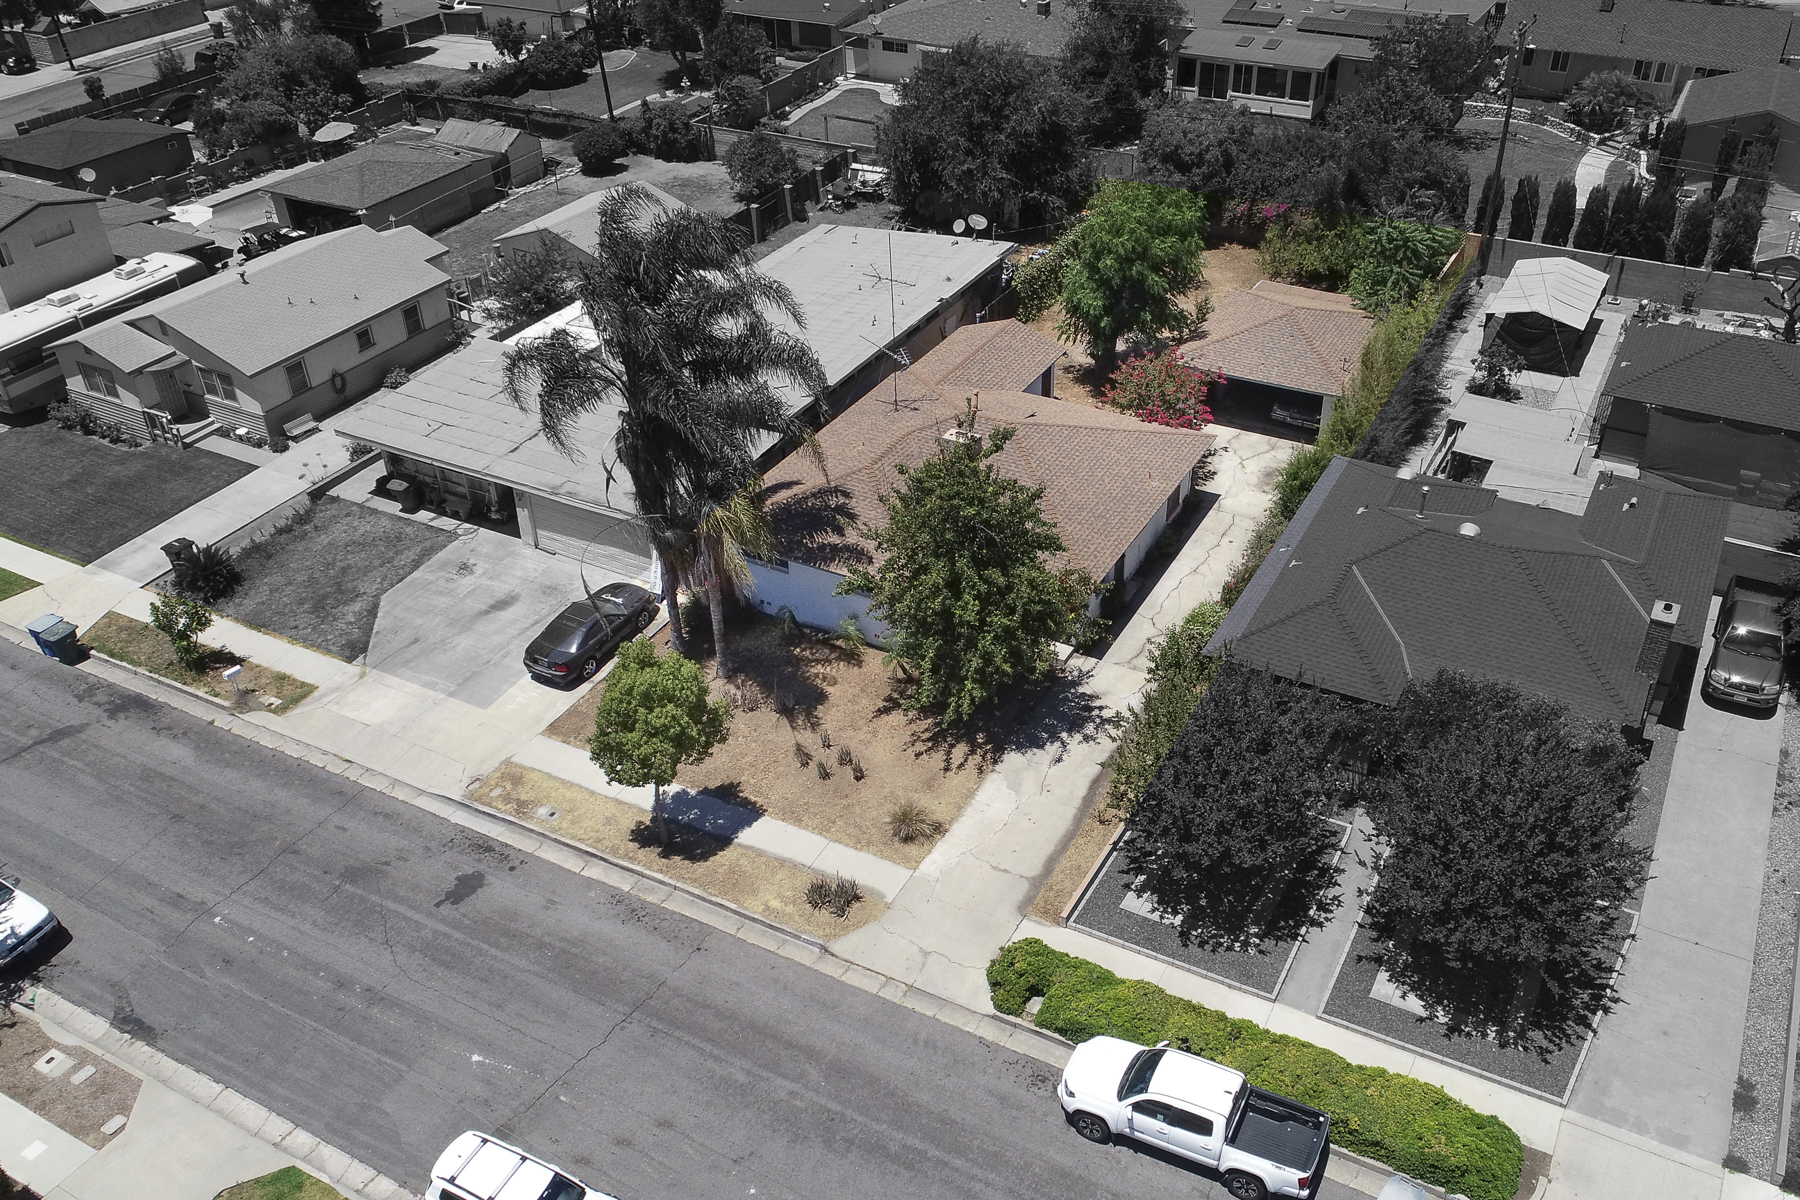 319 E. Francis Ave, La Habra, CA 90631 - Angled View 2 - Home - Grayed Out Neighbors